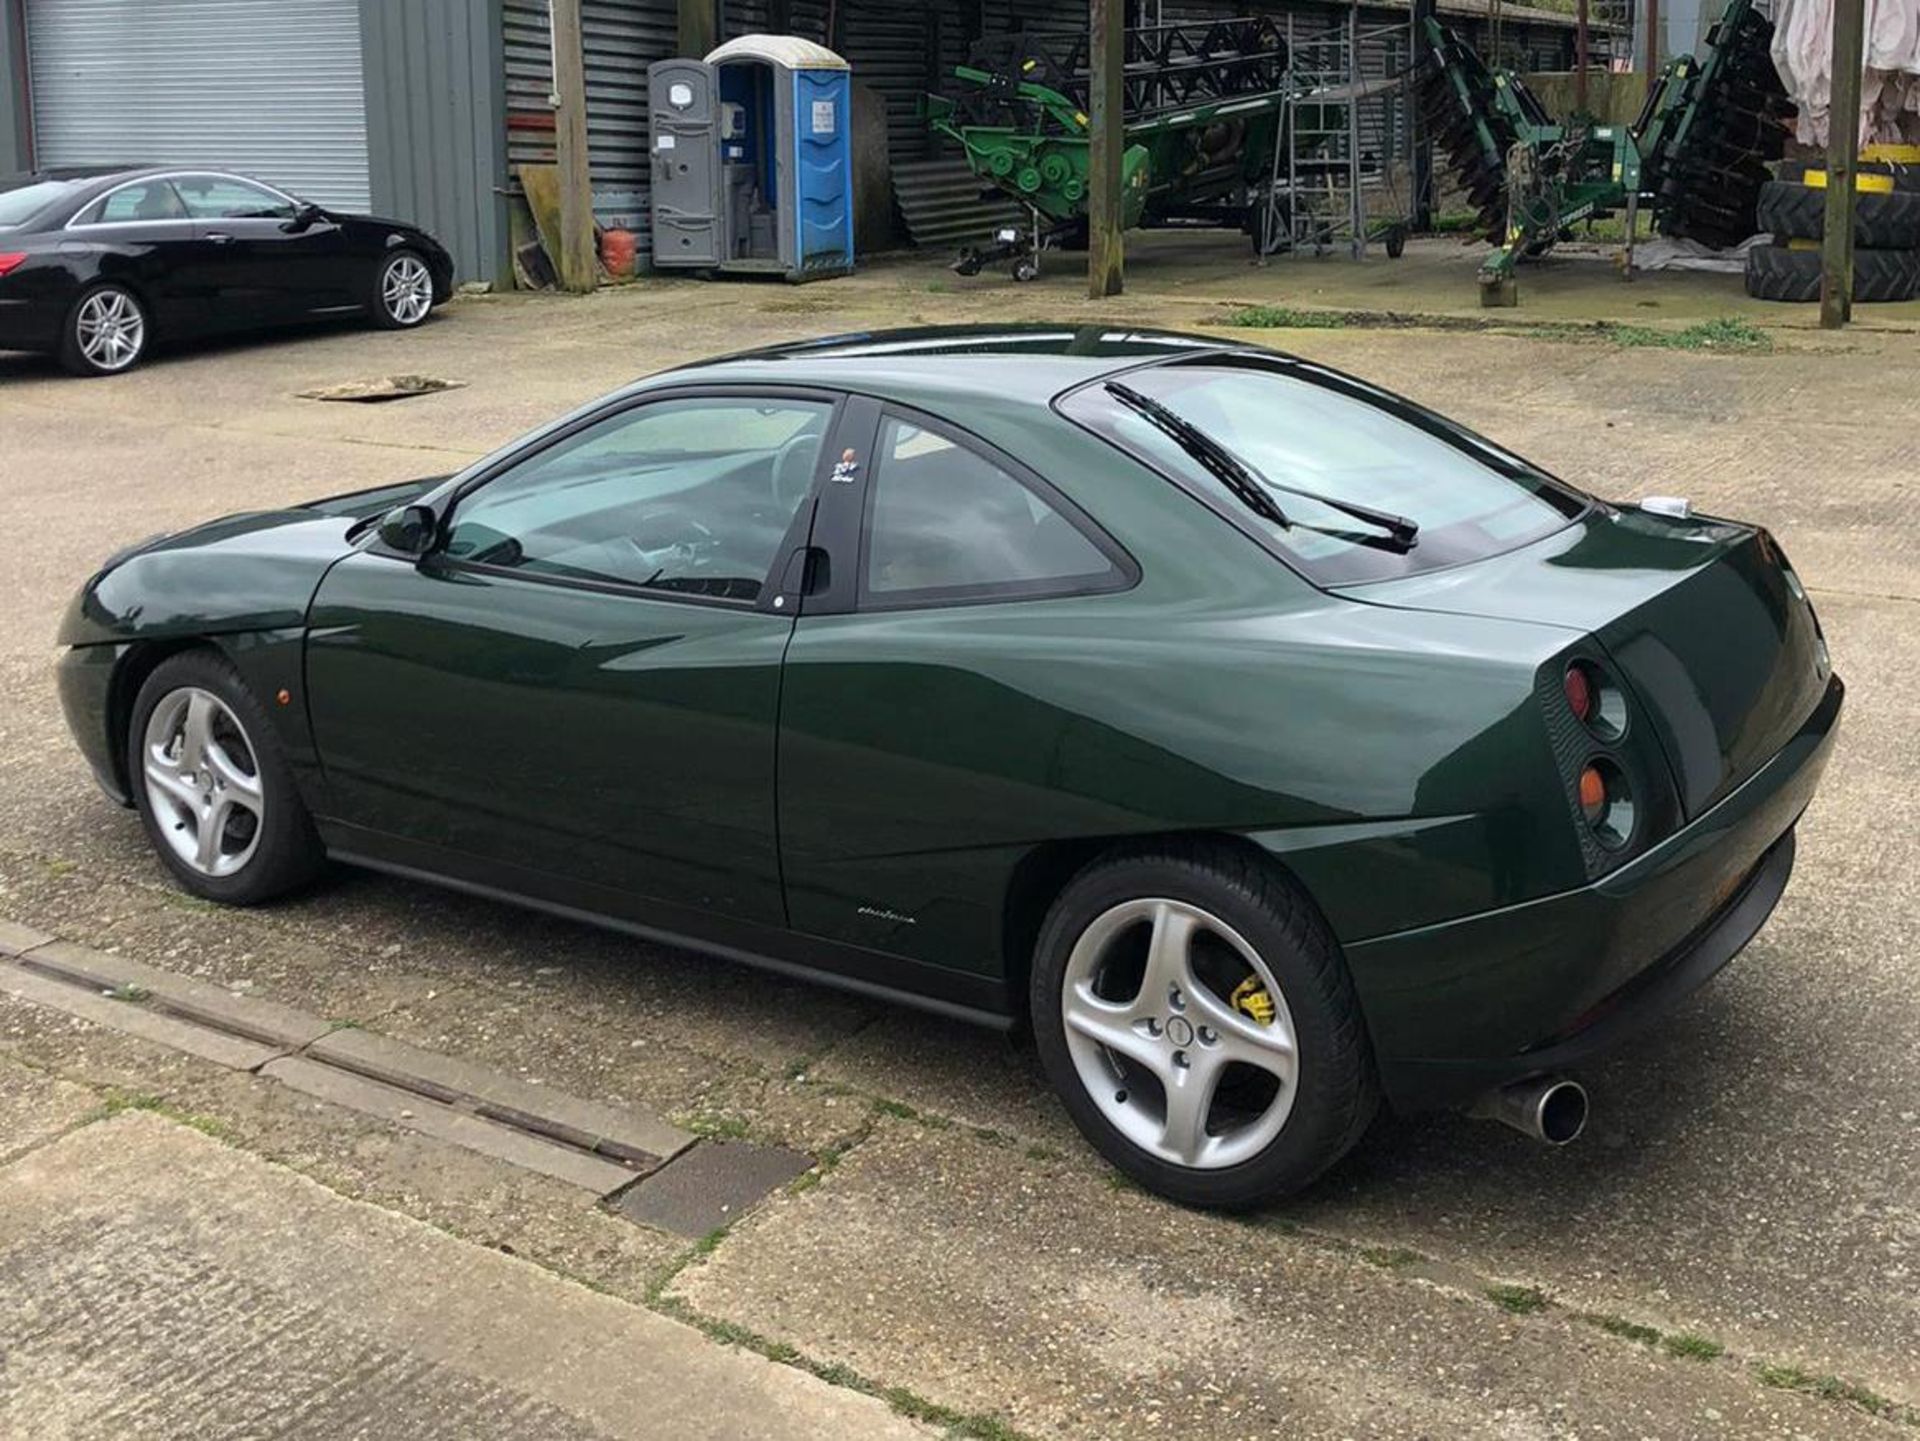 1997 Fiat Coupe 20V Turbo - Image 3 of 5